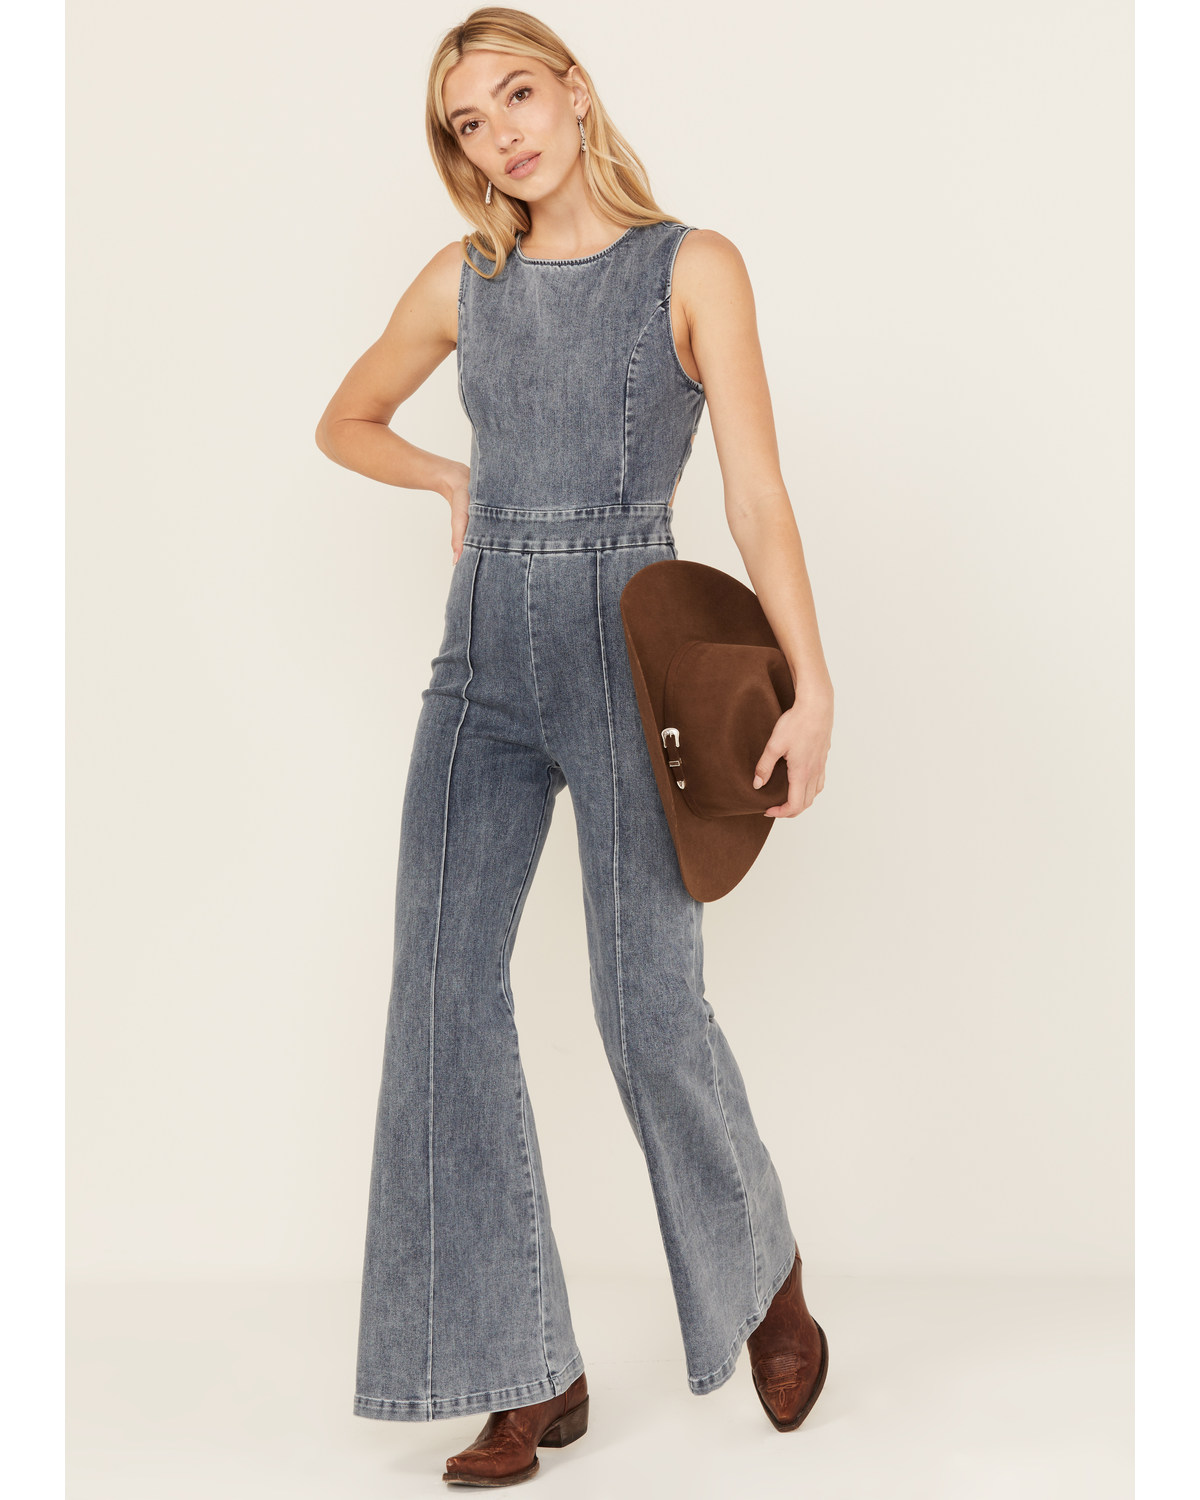 Flying Tomato Women's It's Another Day Light Denim Jumpsuit